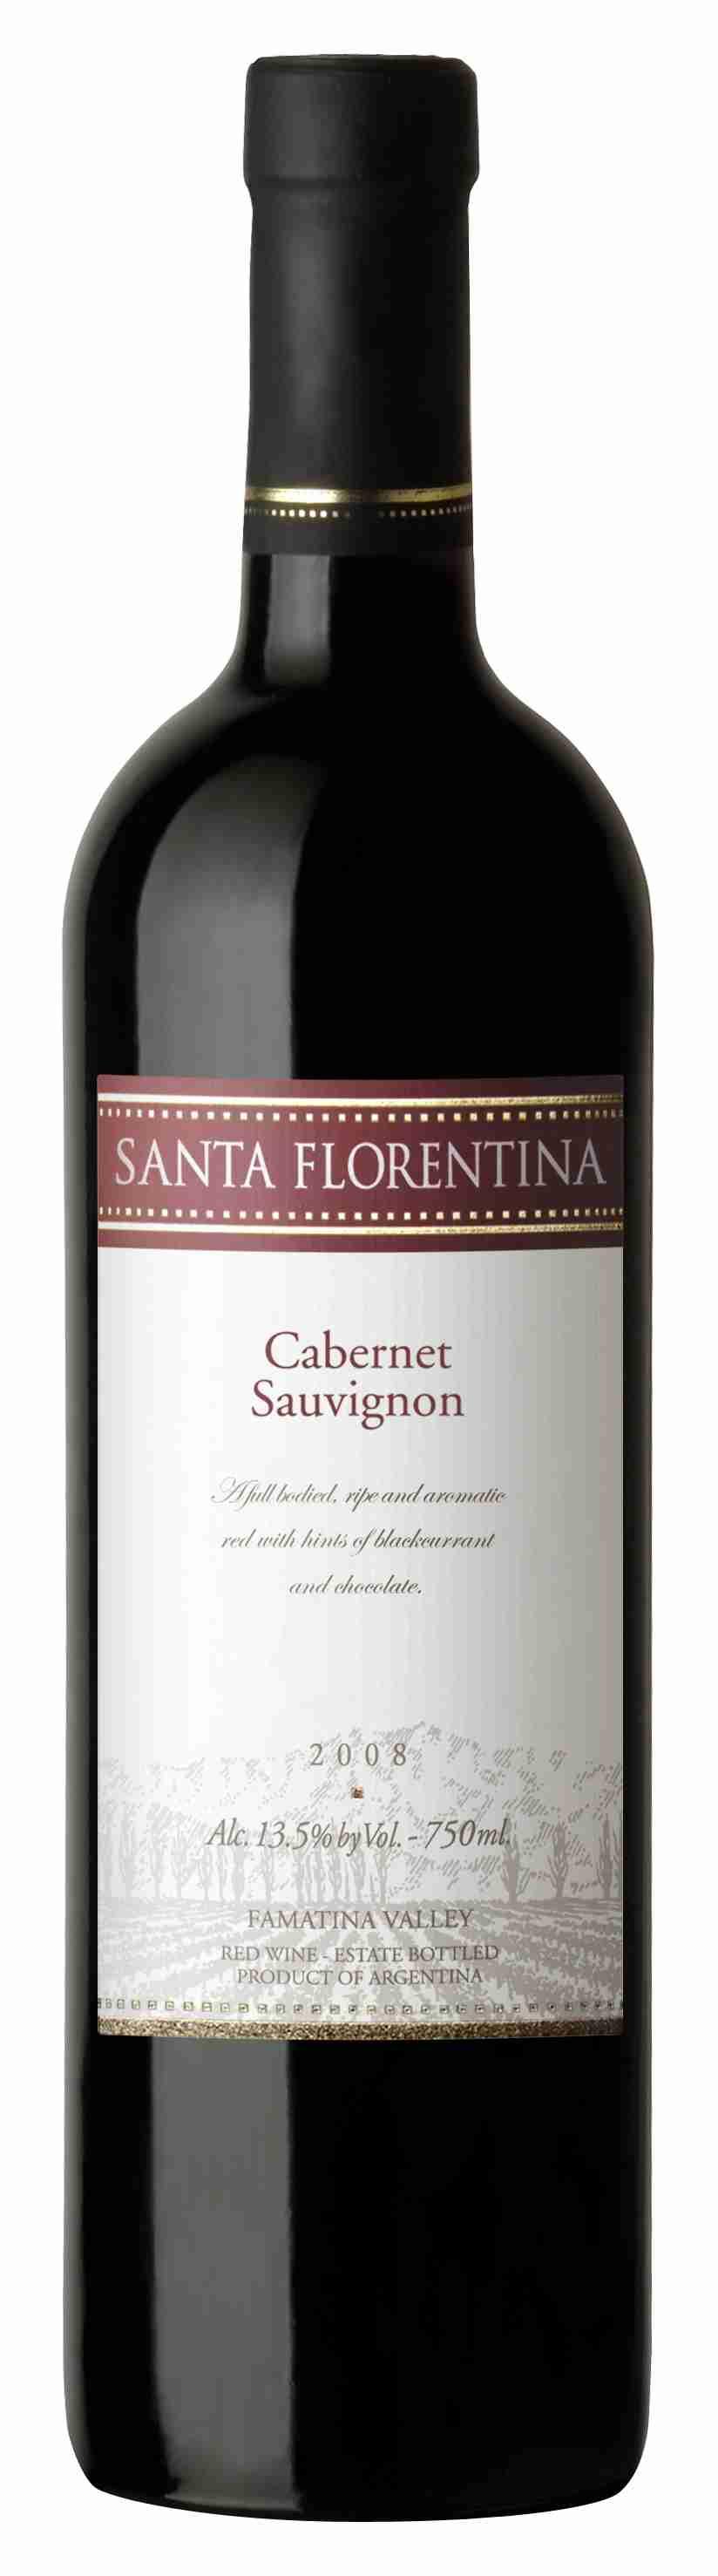 SANTA FLORENTINA / Varietals & Bivarietals The Santa Florentina vineyards and winery became a department of La Riojana in 1992 with a specific purpose of introducing an established and well respected